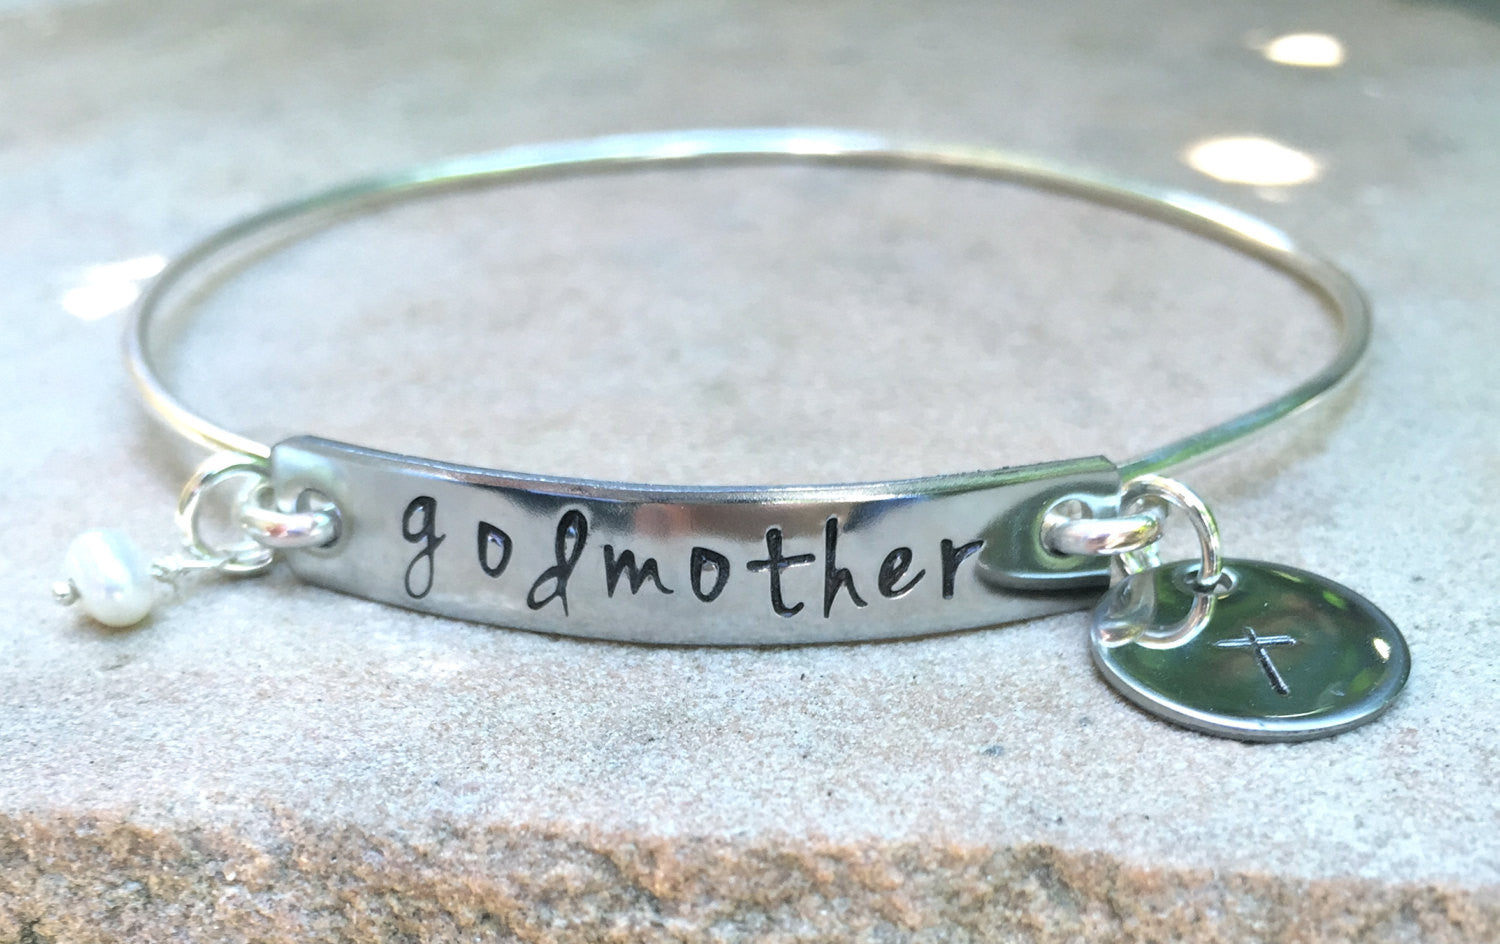 Godmother Bracelet, Godmother Gifts, Baptism Gifts, Personalized Godmother Jewlelry, natashaaloha - Natashaaloha, jewelry, bracelets, necklace, keychains, fishing lures, gifts for men, charms, personalized, 